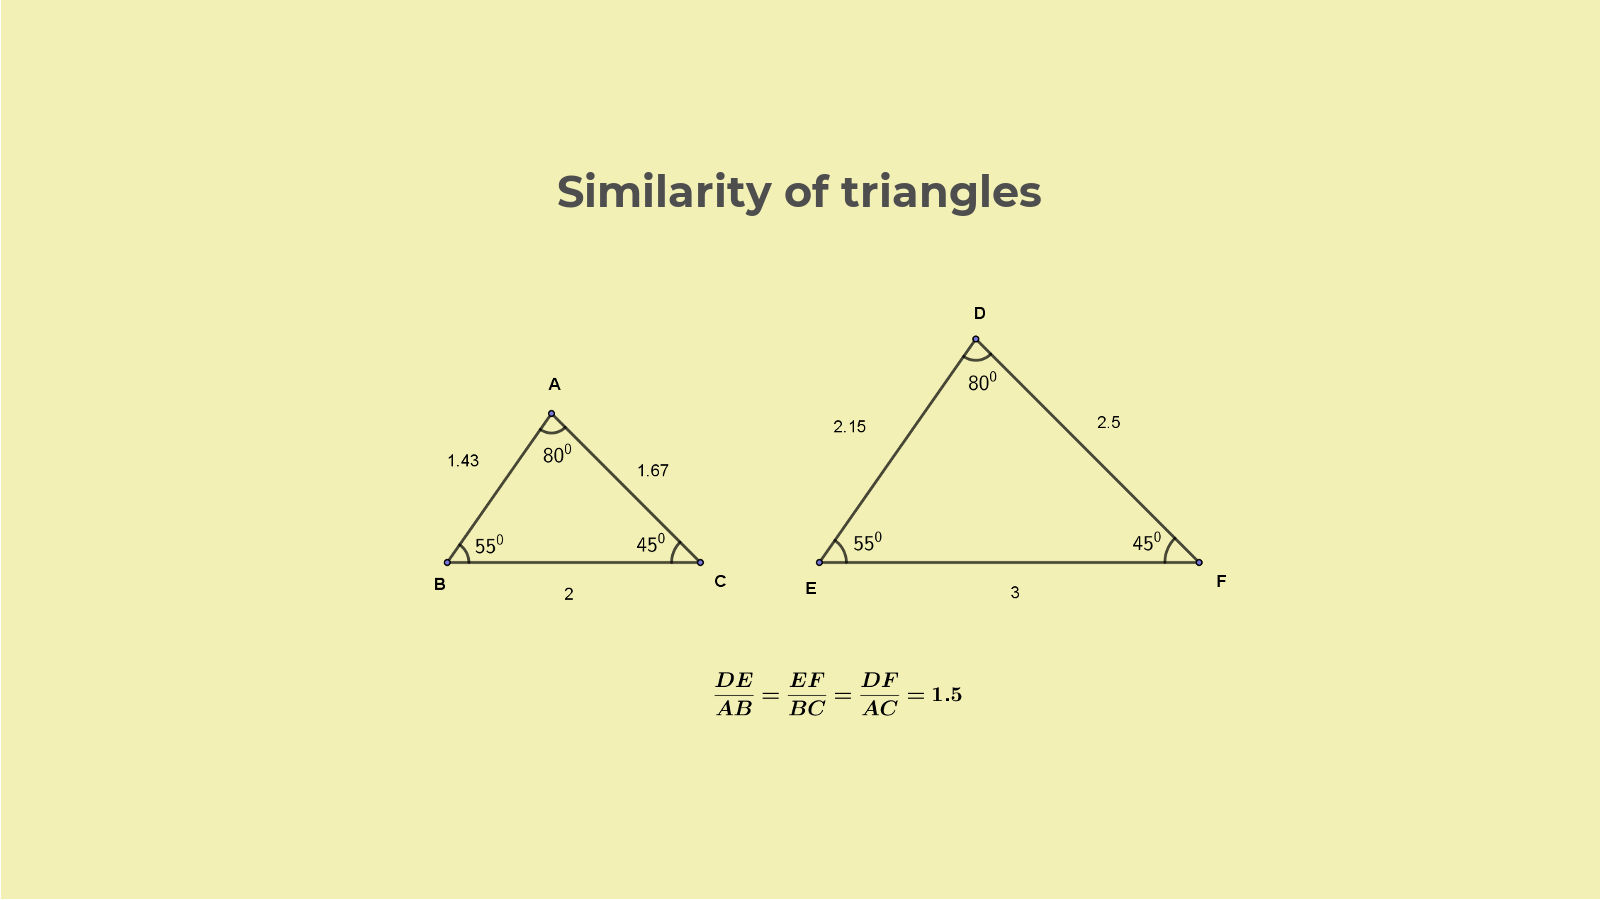 NCERT Solutions for Class 10 Maths Chapter 6 Triangles